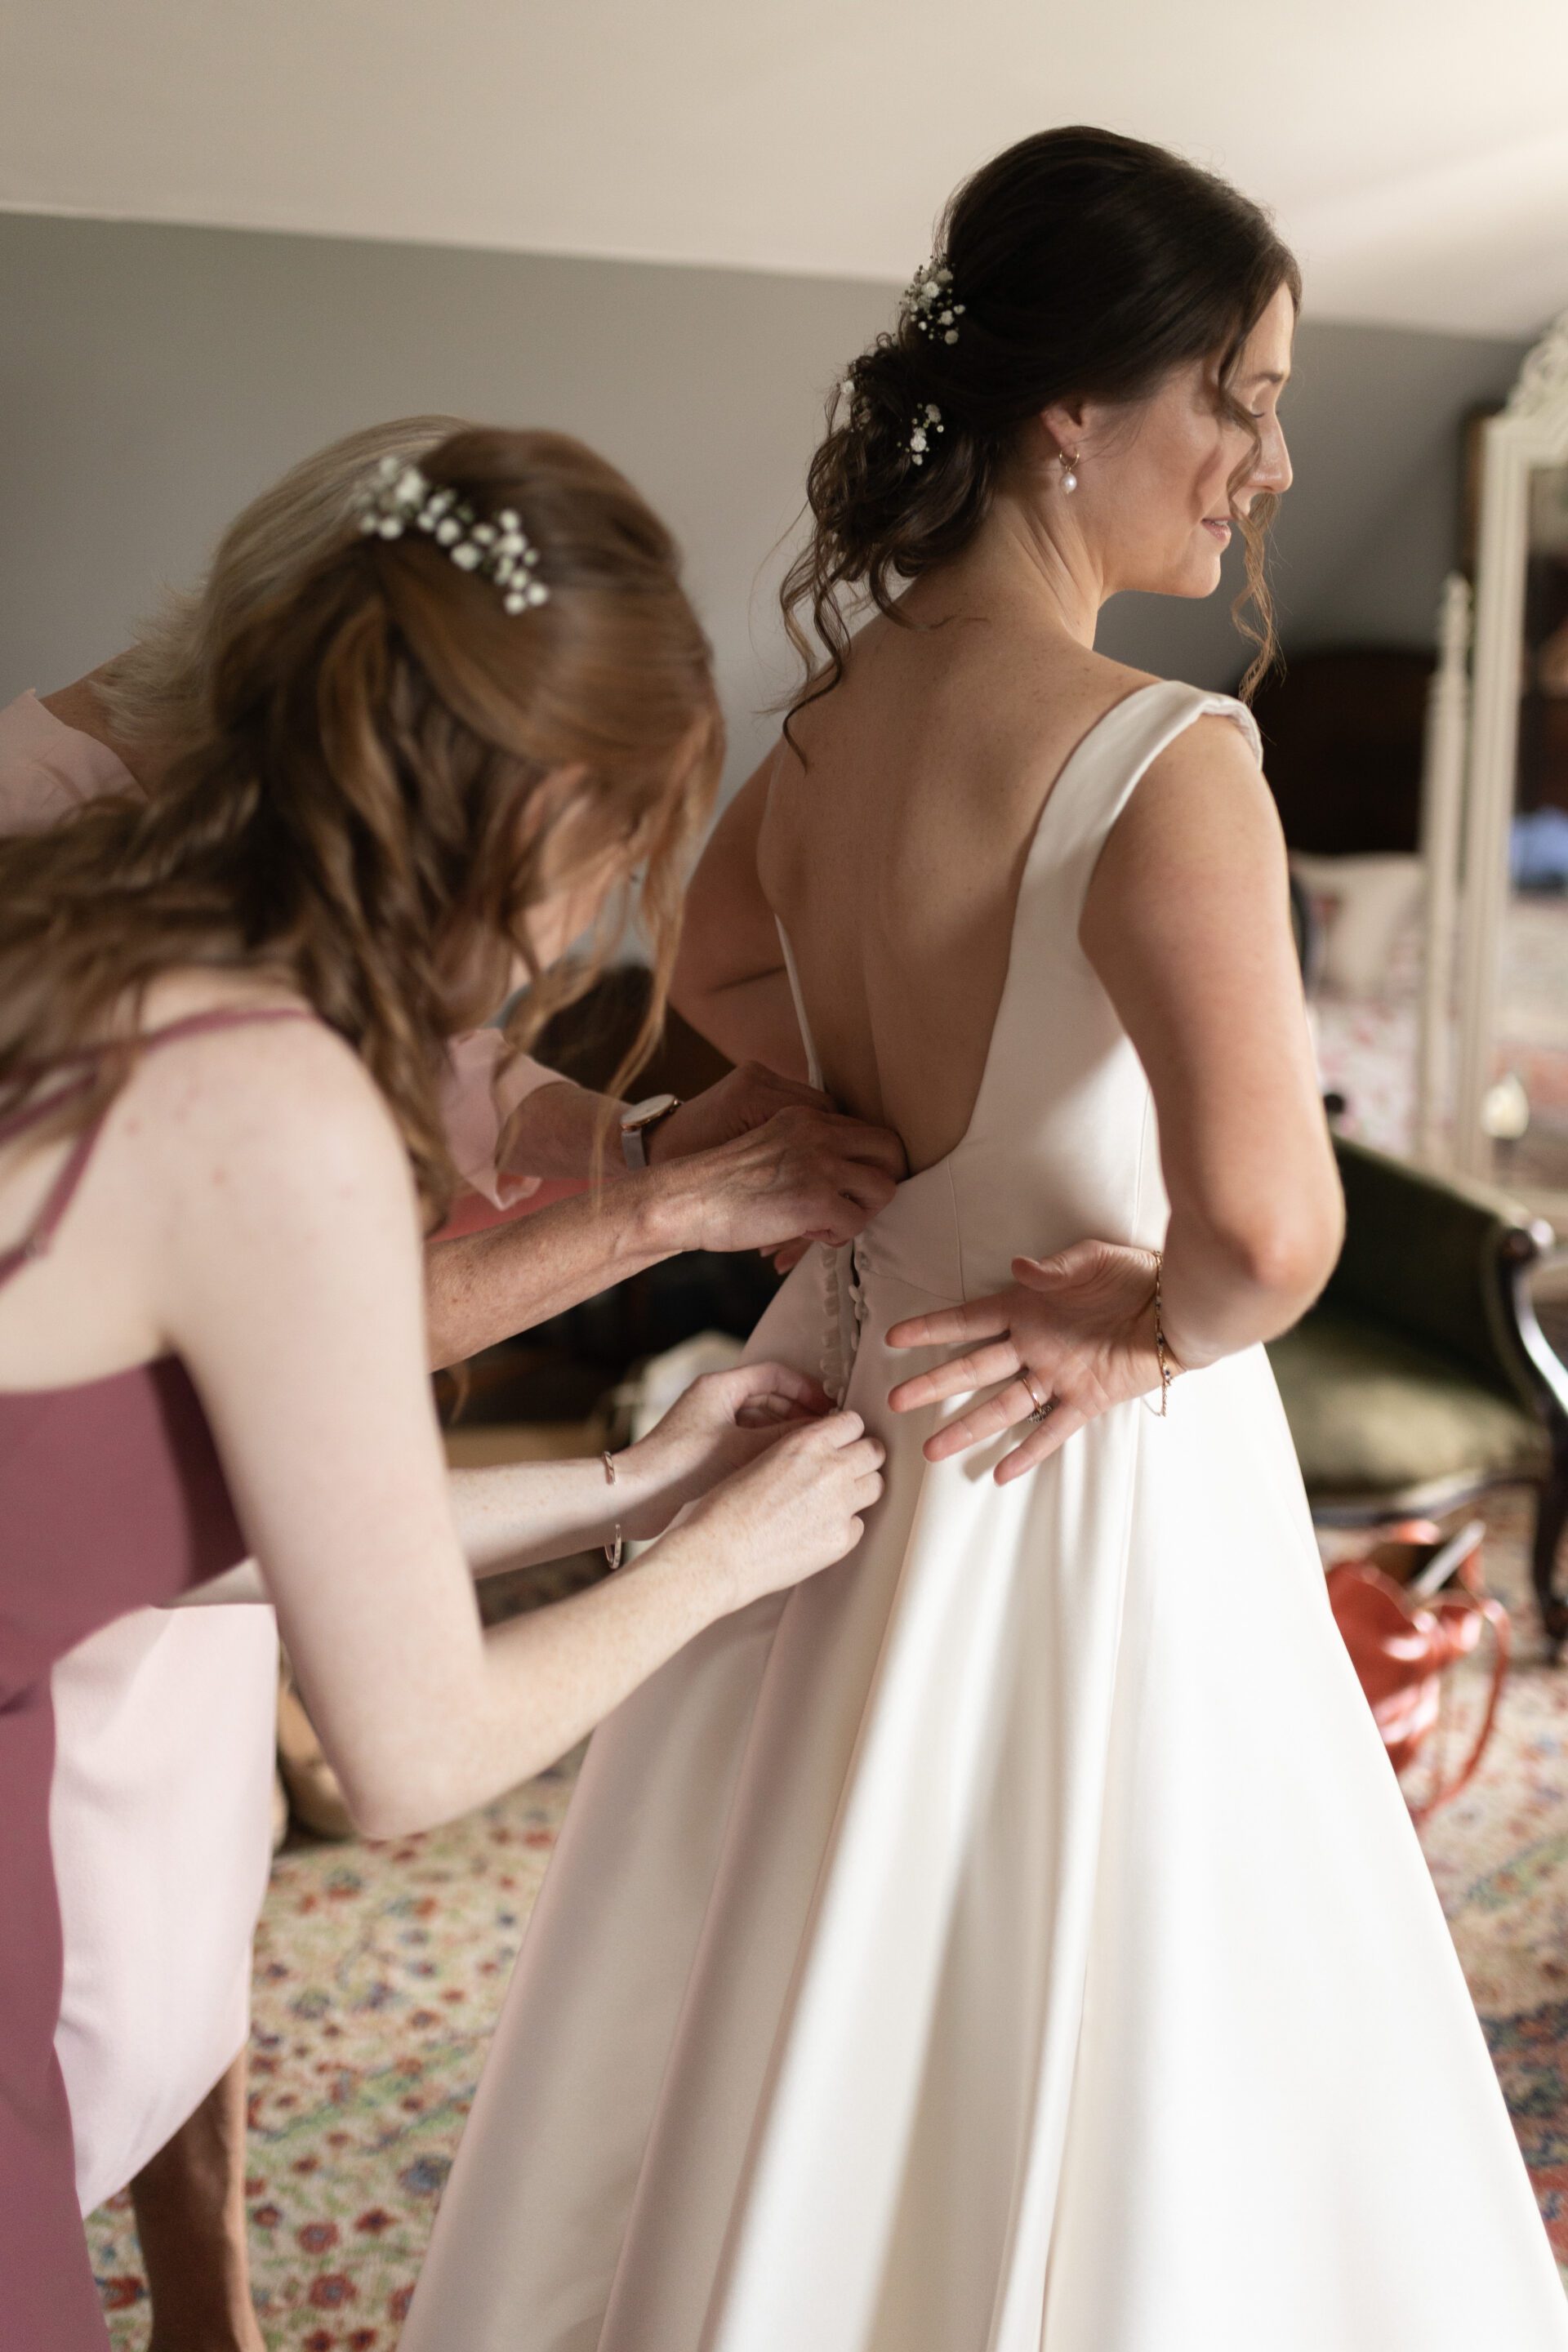 The bride gets into her Millie Couture wedding dress